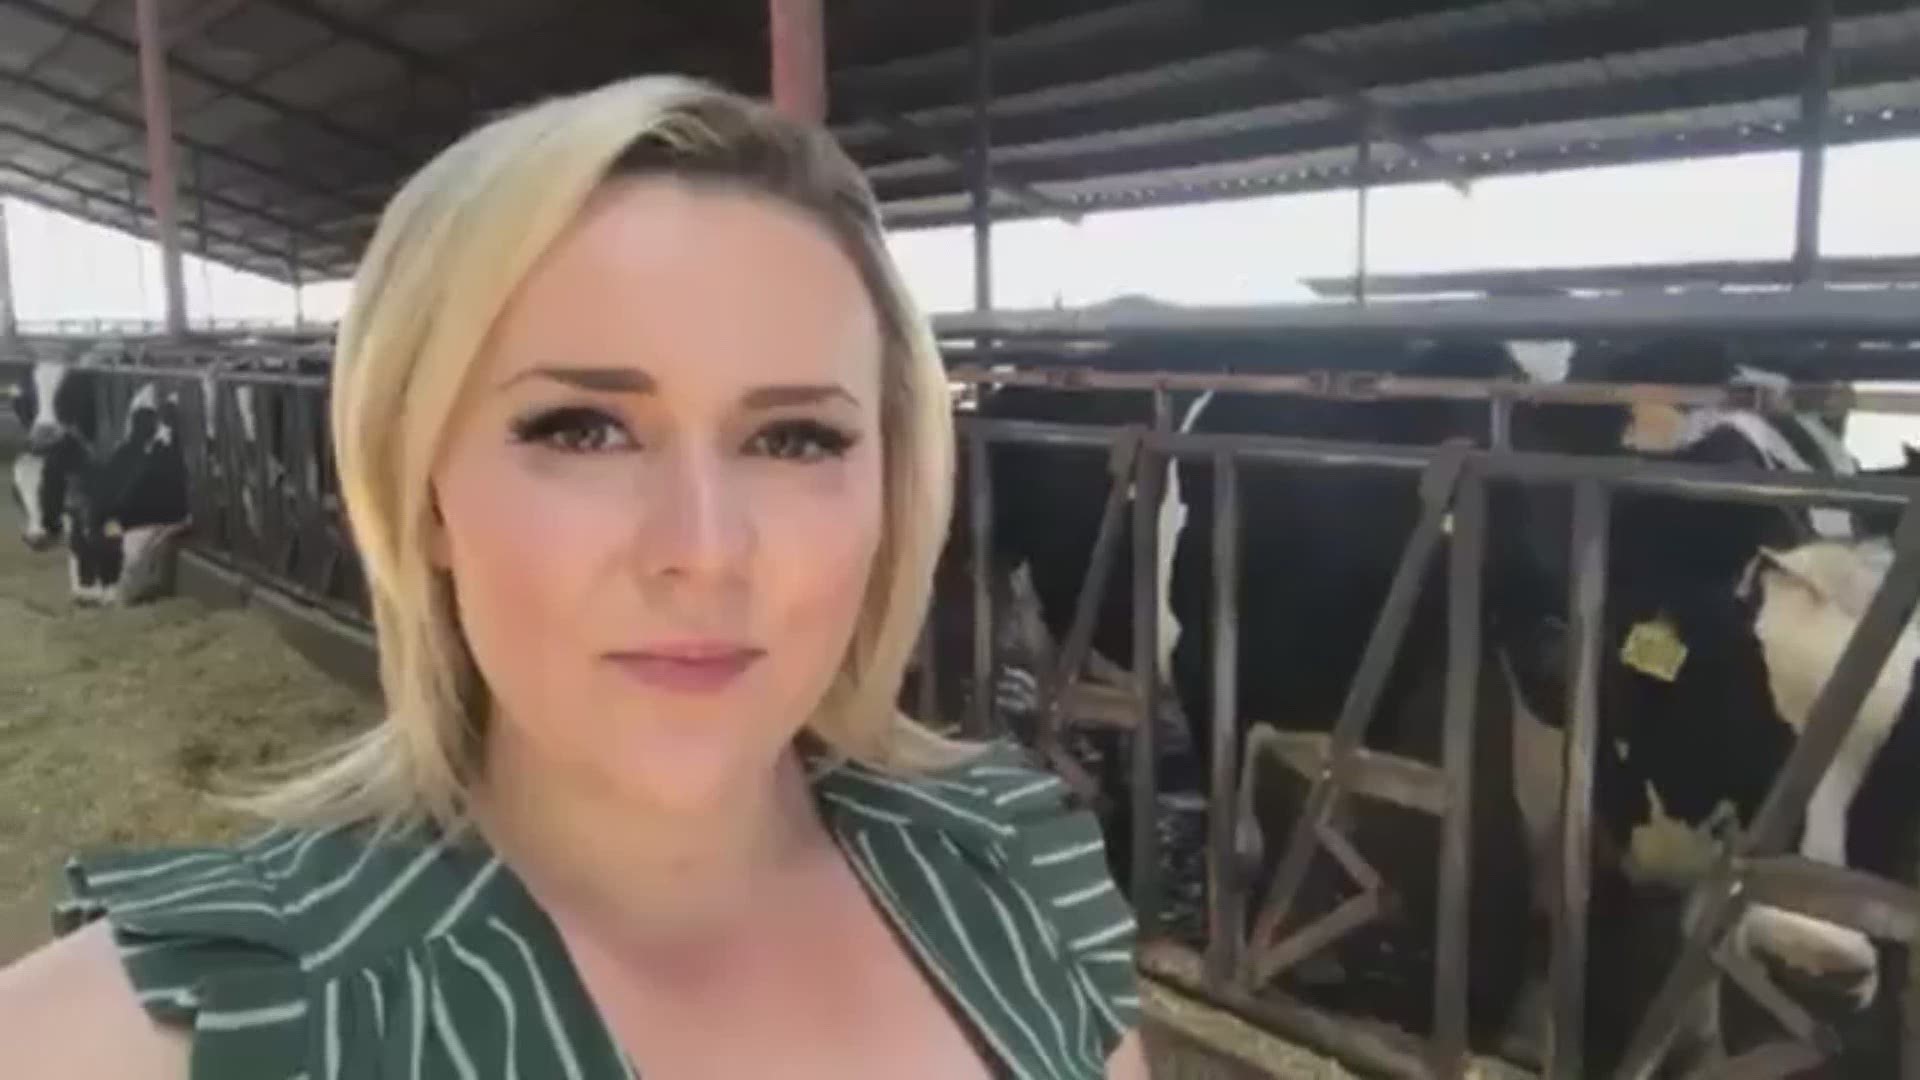 ABC10 pulled the numbers and found that more than 50 Stanislaus County dairy farmers chose to leave the business between 2012 and 2017. Why are more dairy farmers choosing to leave the business than ever before? Lena Howland spoke with one farmer who chose to leave and current farmers who are still struggling through the business.